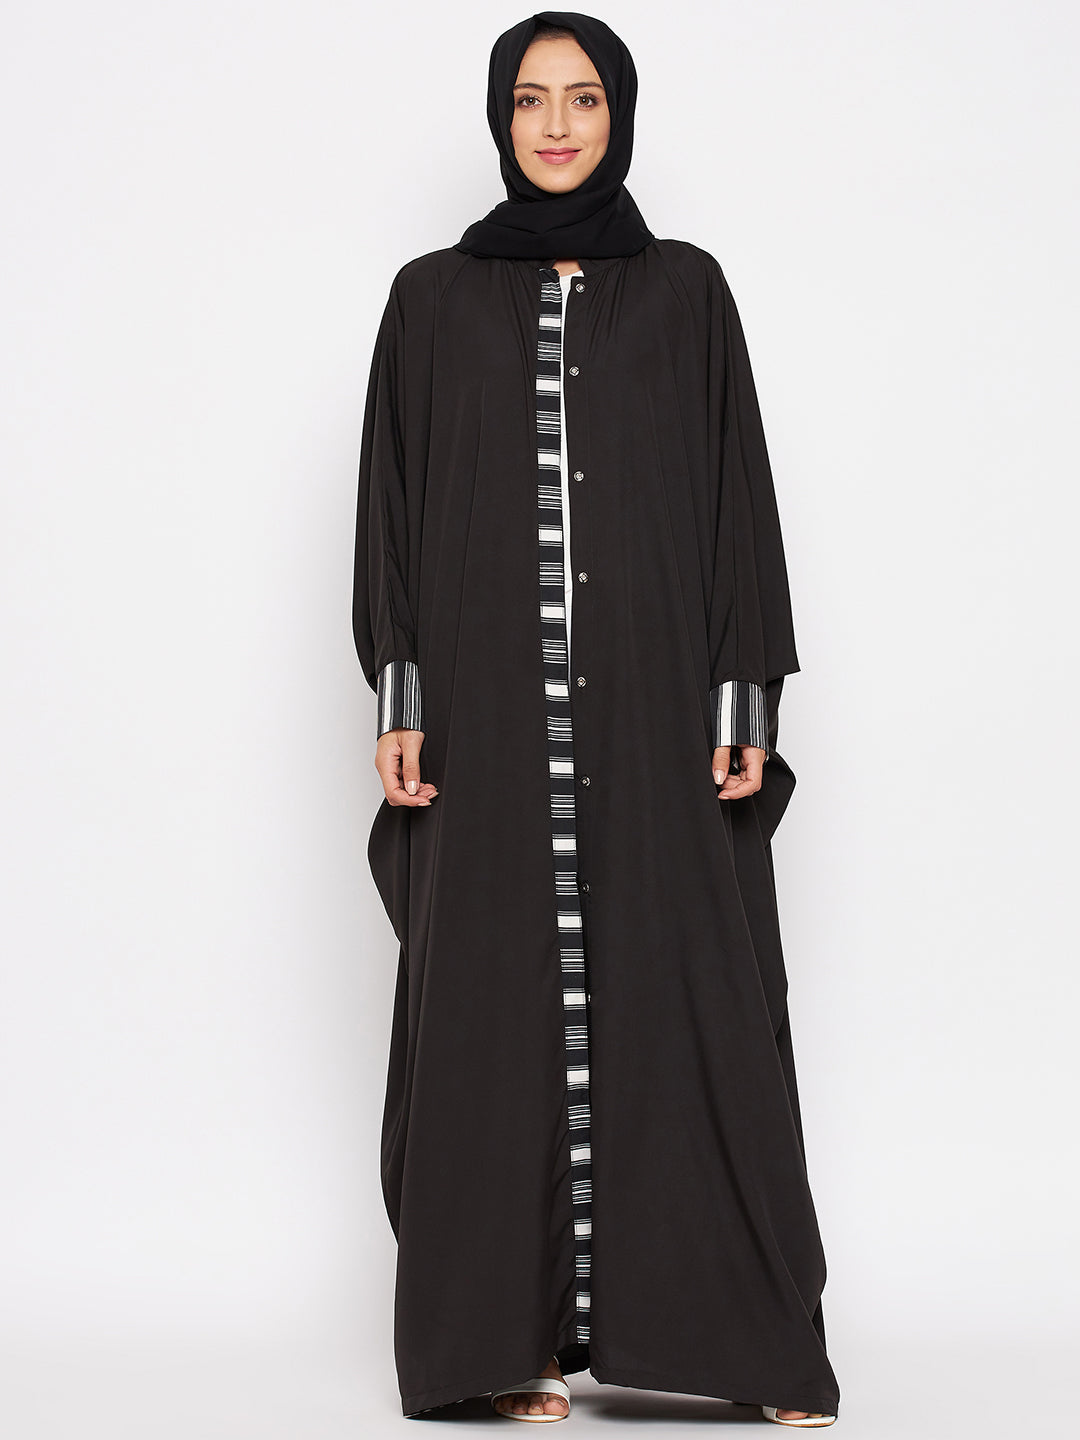 Front Open Black Solid Kaftan Abaya for Women with Black Georgette Hijab